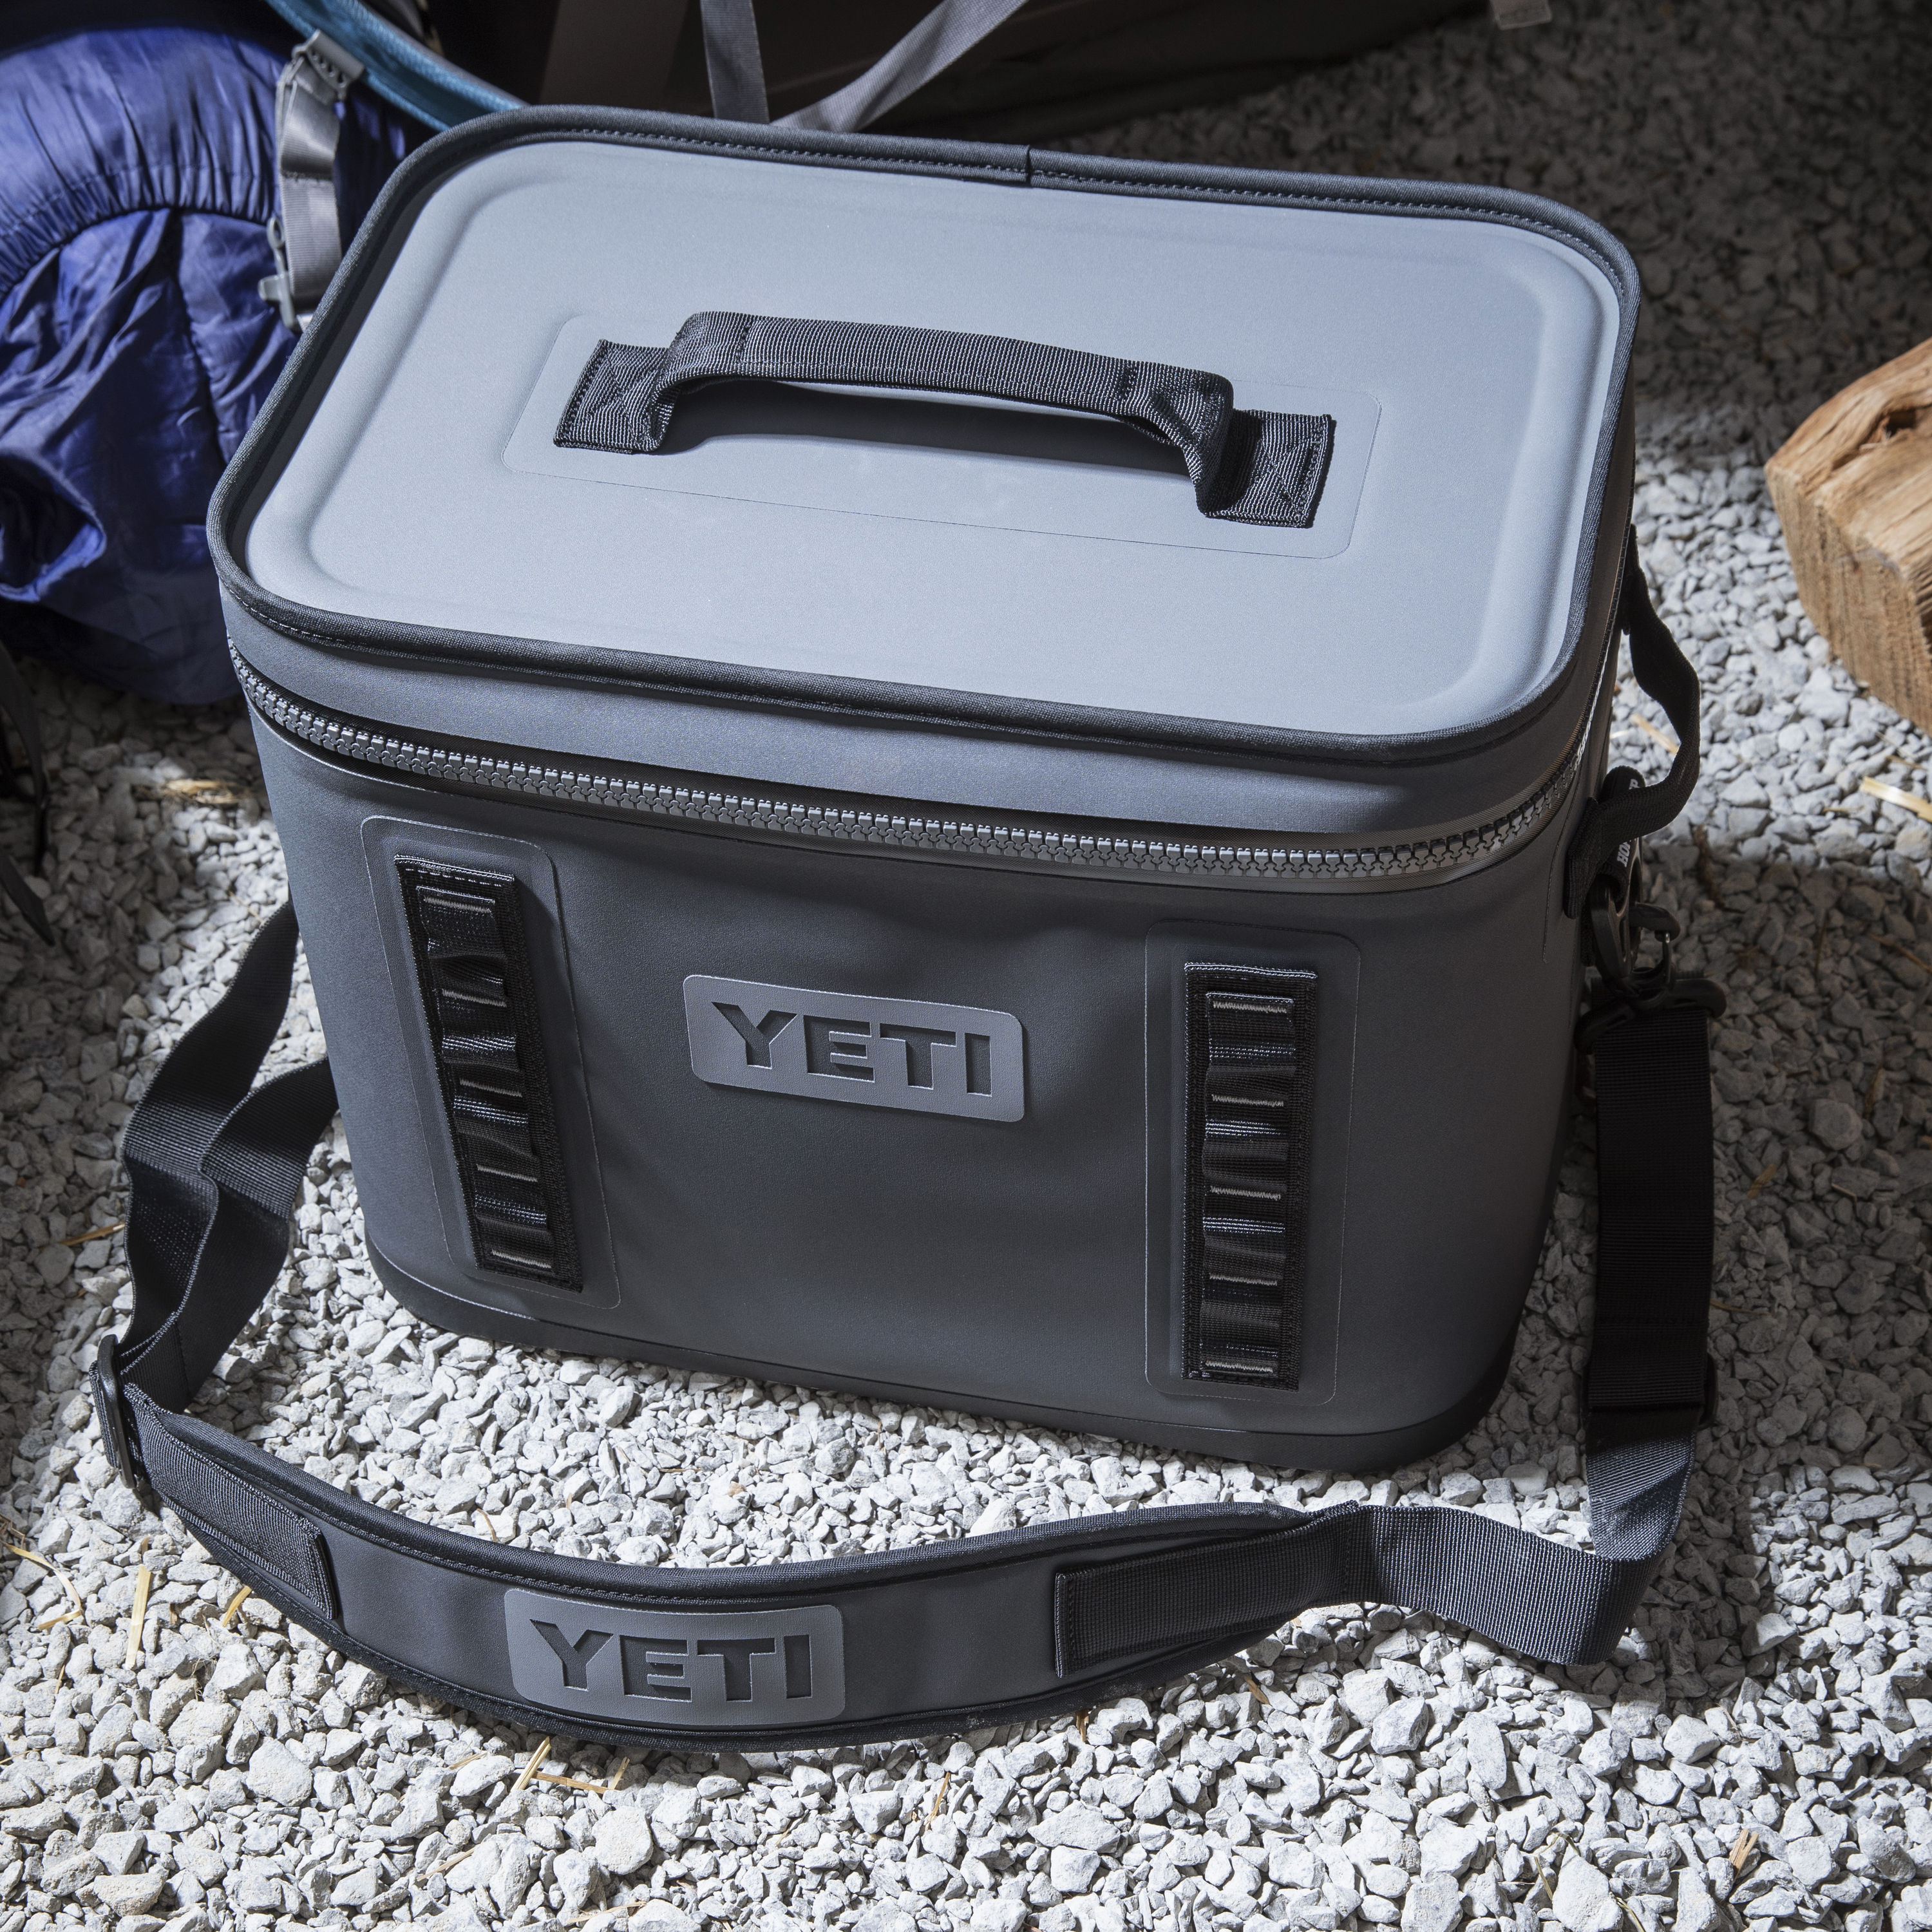 YETI Hopper Flip 18 Insulated Personal Cooler, Charcoal in the 